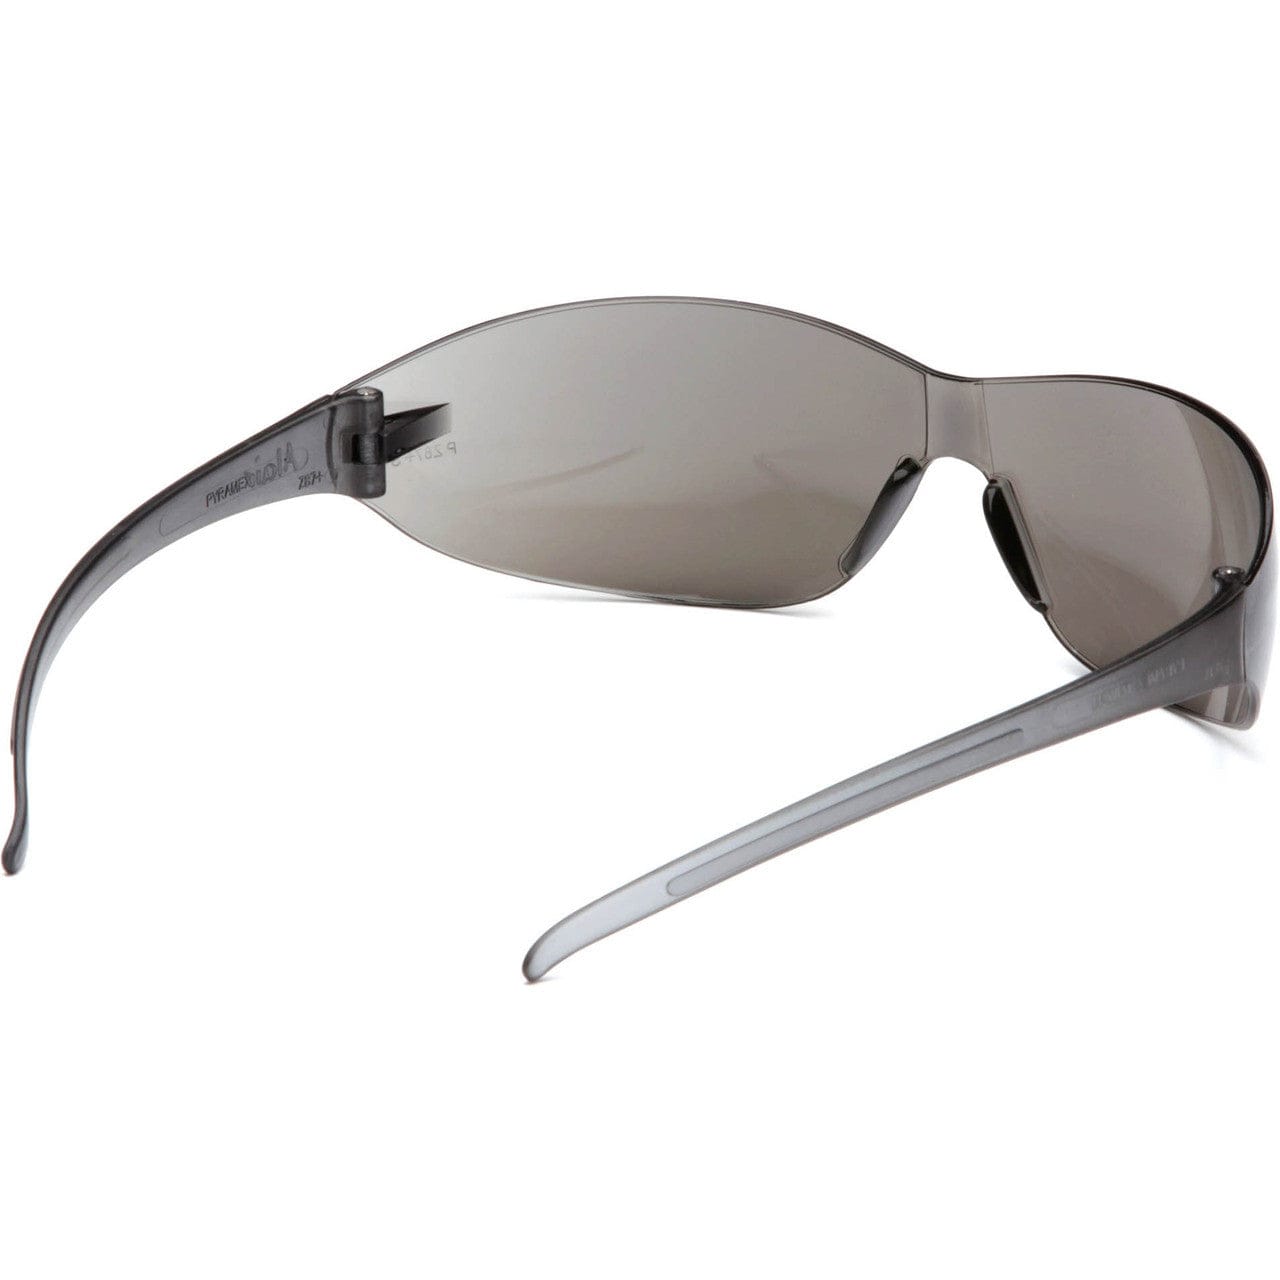 Pyramex Alair Safety Glasses with Silver Mirror Lens S3270S Inside View